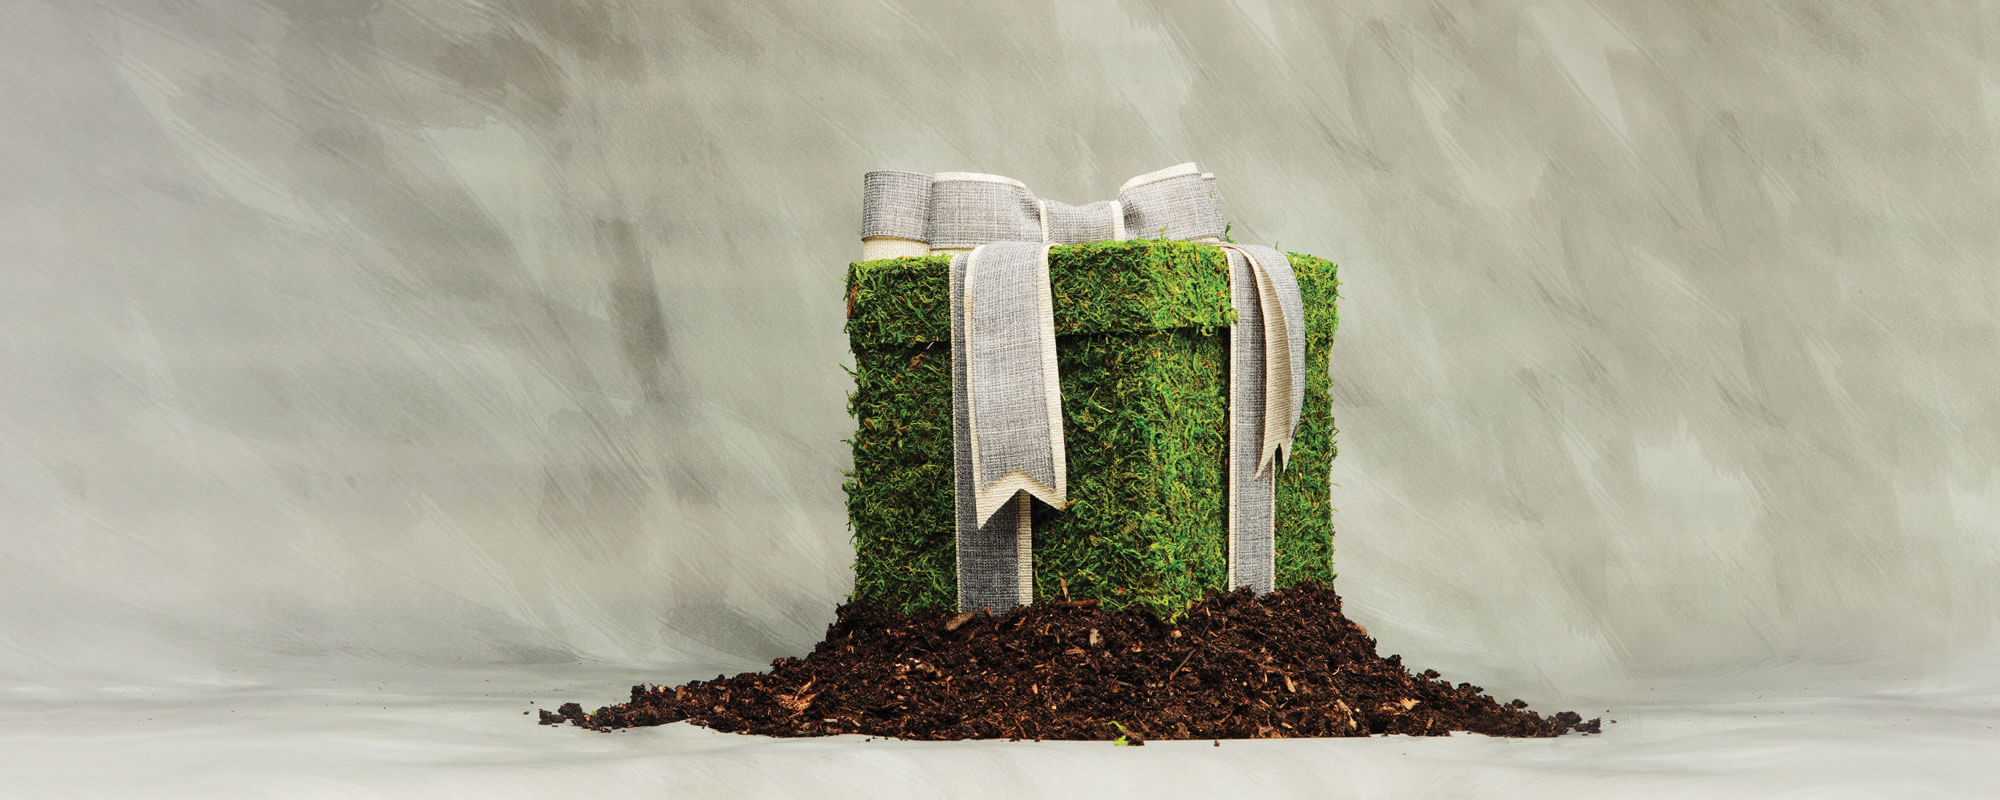 Gift box made of grass and soil